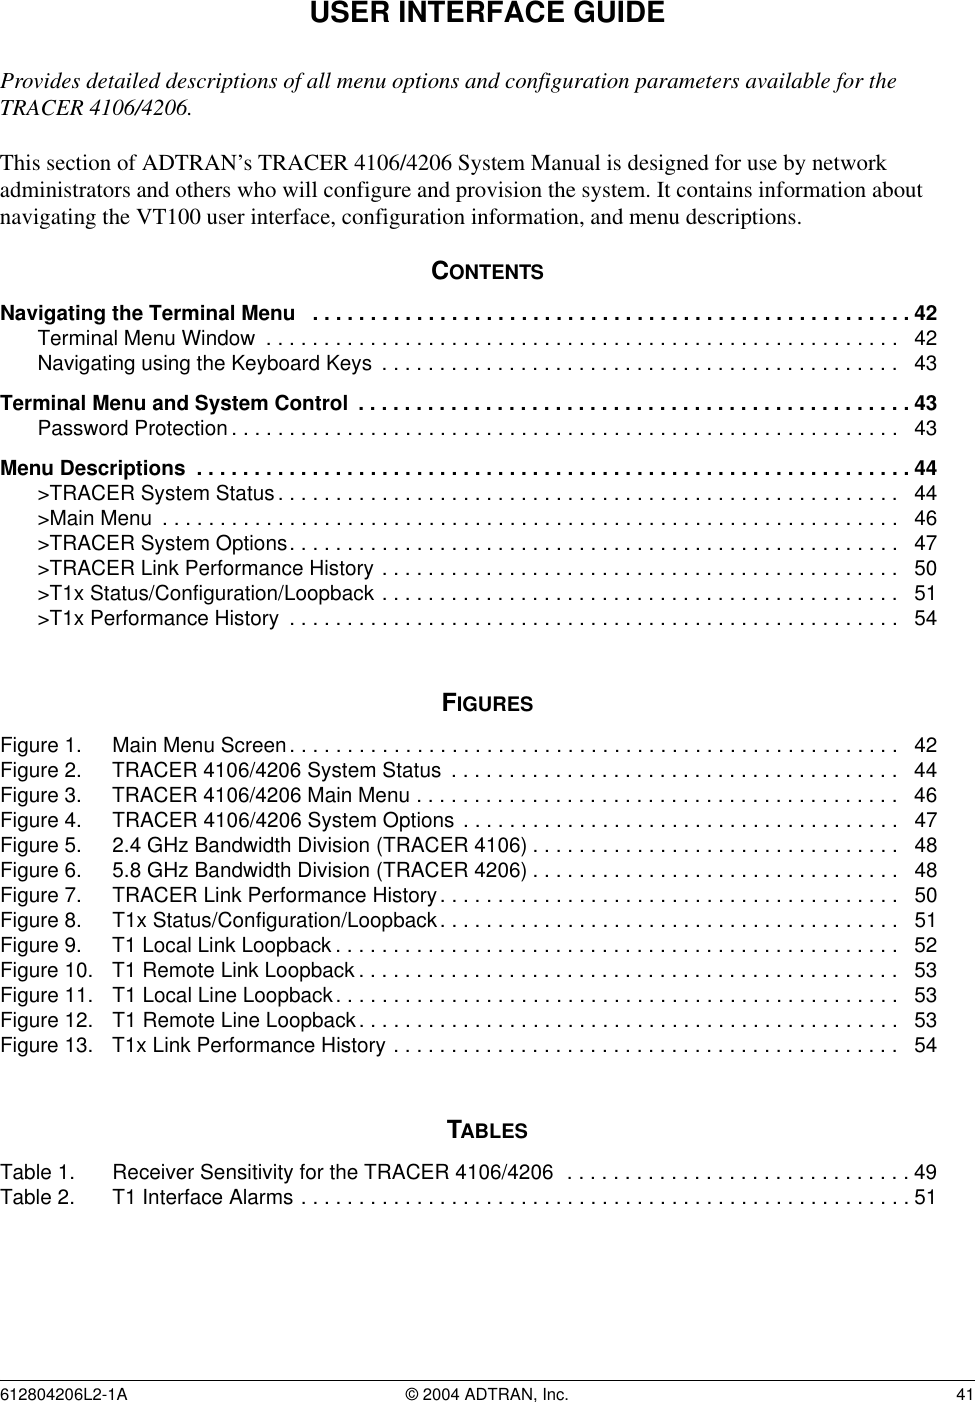 612804206L2-1A © 2004 ADTRAN, Inc.  41USER INTERFACE GUIDEProvides detailed descriptions of all menu options and configuration parameters available for the TRACER 4106/4206.This section of ADTRAN’s TRACER 4106/4206 System Manual is designed for use by network administrators and others who will configure and provision the system. It contains information about navigating the VT100 user interface, configuration information, and menu descriptions.CONTENTSNavigating the Terminal Menu   . . . . . . . . . . . . . . . . . . . . . . . . . . . . . . . . . . . . . . . . . . . . . . . . . . . . 42Terminal Menu Window  . . . . . . . . . . . . . . . . . . . . . . . . . . . . . . . . . . . . . . . . . . . . . . . . . . . . . . .   42Navigating using the Keyboard Keys  . . . . . . . . . . . . . . . . . . . . . . . . . . . . . . . . . . . . . . . . . . . . .   43Terminal Menu and System Control  . . . . . . . . . . . . . . . . . . . . . . . . . . . . . . . . . . . . . . . . . . . . . . . .43Password Protection . . . . . . . . . . . . . . . . . . . . . . . . . . . . . . . . . . . . . . . . . . . . . . . . . . . . . . . . . .   43Menu Descriptions  . . . . . . . . . . . . . . . . . . . . . . . . . . . . . . . . . . . . . . . . . . . . . . . . . . . . . . . . . . . . . . 44&gt;TRACER System Status . . . . . . . . . . . . . . . . . . . . . . . . . . . . . . . . . . . . . . . . . . . . . . . . . . . . . .  44&gt;Main Menu  . . . . . . . . . . . . . . . . . . . . . . . . . . . . . . . . . . . . . . . . . . . . . . . . . . . . . . . . . . . . . . . .   46&gt;TRACER System Options. . . . . . . . . . . . . . . . . . . . . . . . . . . . . . . . . . . . . . . . . . . . . . . . . . . . .  47&gt;TRACER Link Performance History . . . . . . . . . . . . . . . . . . . . . . . . . . . . . . . . . . . . . . . . . . . . .   50&gt;T1x Status/Configuration/Loopback . . . . . . . . . . . . . . . . . . . . . . . . . . . . . . . . . . . . . . . . . . . . .   51&gt;T1x Performance History  . . . . . . . . . . . . . . . . . . . . . . . . . . . . . . . . . . . . . . . . . . . . . . . . . . . . .   54FIGURESFigure 1. Main Menu Screen. . . . . . . . . . . . . . . . . . . . . . . . . . . . . . . . . . . . . . . . . . . . . . . . . . . . .   42Figure 2. TRACER 4106/4206 System Status  . . . . . . . . . . . . . . . . . . . . . . . . . . . . . . . . . . . . . . .   44Figure 3. TRACER 4106/4206 Main Menu . . . . . . . . . . . . . . . . . . . . . . . . . . . . . . . . . . . . . . . . . .   46Figure 4. TRACER 4106/4206 System Options . . . . . . . . . . . . . . . . . . . . . . . . . . . . . . . . . . . . . .   47Figure 5. 2.4 GHz Bandwidth Division (TRACER 4106) . . . . . . . . . . . . . . . . . . . . . . . . . . . . . . . .   48Figure 6. 5.8 GHz Bandwidth Division (TRACER 4206) . . . . . . . . . . . . . . . . . . . . . . . . . . . . . . . .   48Figure 7. TRACER Link Performance History. . . . . . . . . . . . . . . . . . . . . . . . . . . . . . . . . . . . . . . .   50Figure 8. T1x Status/Configuration/Loopback. . . . . . . . . . . . . . . . . . . . . . . . . . . . . . . . . . . . . . . .   51Figure 9. T1 Local Link Loopback . . . . . . . . . . . . . . . . . . . . . . . . . . . . . . . . . . . . . . . . . . . . . . . . .  52Figure 10. T1 Remote Link Loopback . . . . . . . . . . . . . . . . . . . . . . . . . . . . . . . . . . . . . . . . . . . . . . .   53Figure 11. T1 Local Line Loopback. . . . . . . . . . . . . . . . . . . . . . . . . . . . . . . . . . . . . . . . . . . . . . . . .   53Figure 12. T1 Remote Line Loopback. . . . . . . . . . . . . . . . . . . . . . . . . . . . . . . . . . . . . . . . . . . . . . .   53Figure 13. T1x Link Performance History . . . . . . . . . . . . . . . . . . . . . . . . . . . . . . . . . . . . . . . . . . . .   54TABLESTable 1. Receiver Sensitivity for the TRACER 4106/4206  . . . . . . . . . . . . . . . . . . . . . . . . . . . . . . 49Table 2. T1 Interface Alarms . . . . . . . . . . . . . . . . . . . . . . . . . . . . . . . . . . . . . . . . . . . . . . . . . . . . . 51